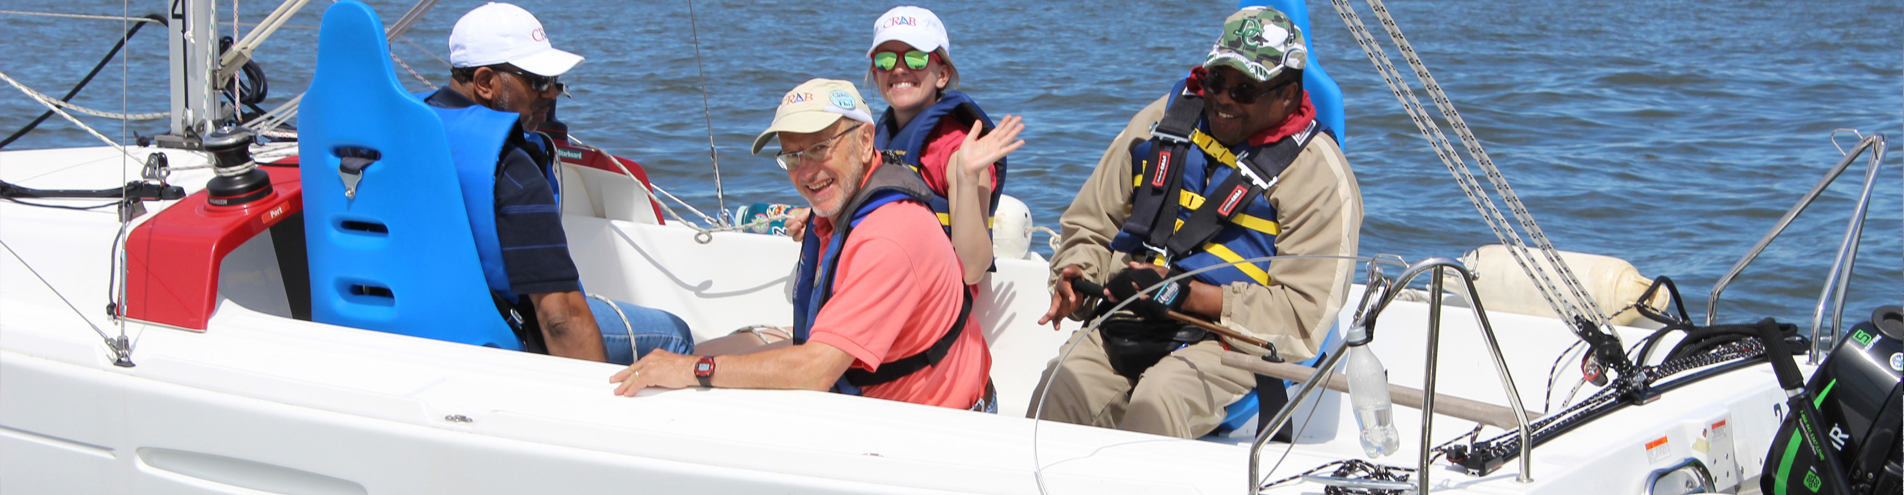 Group of people sitting in a boat smiling and waving at camera